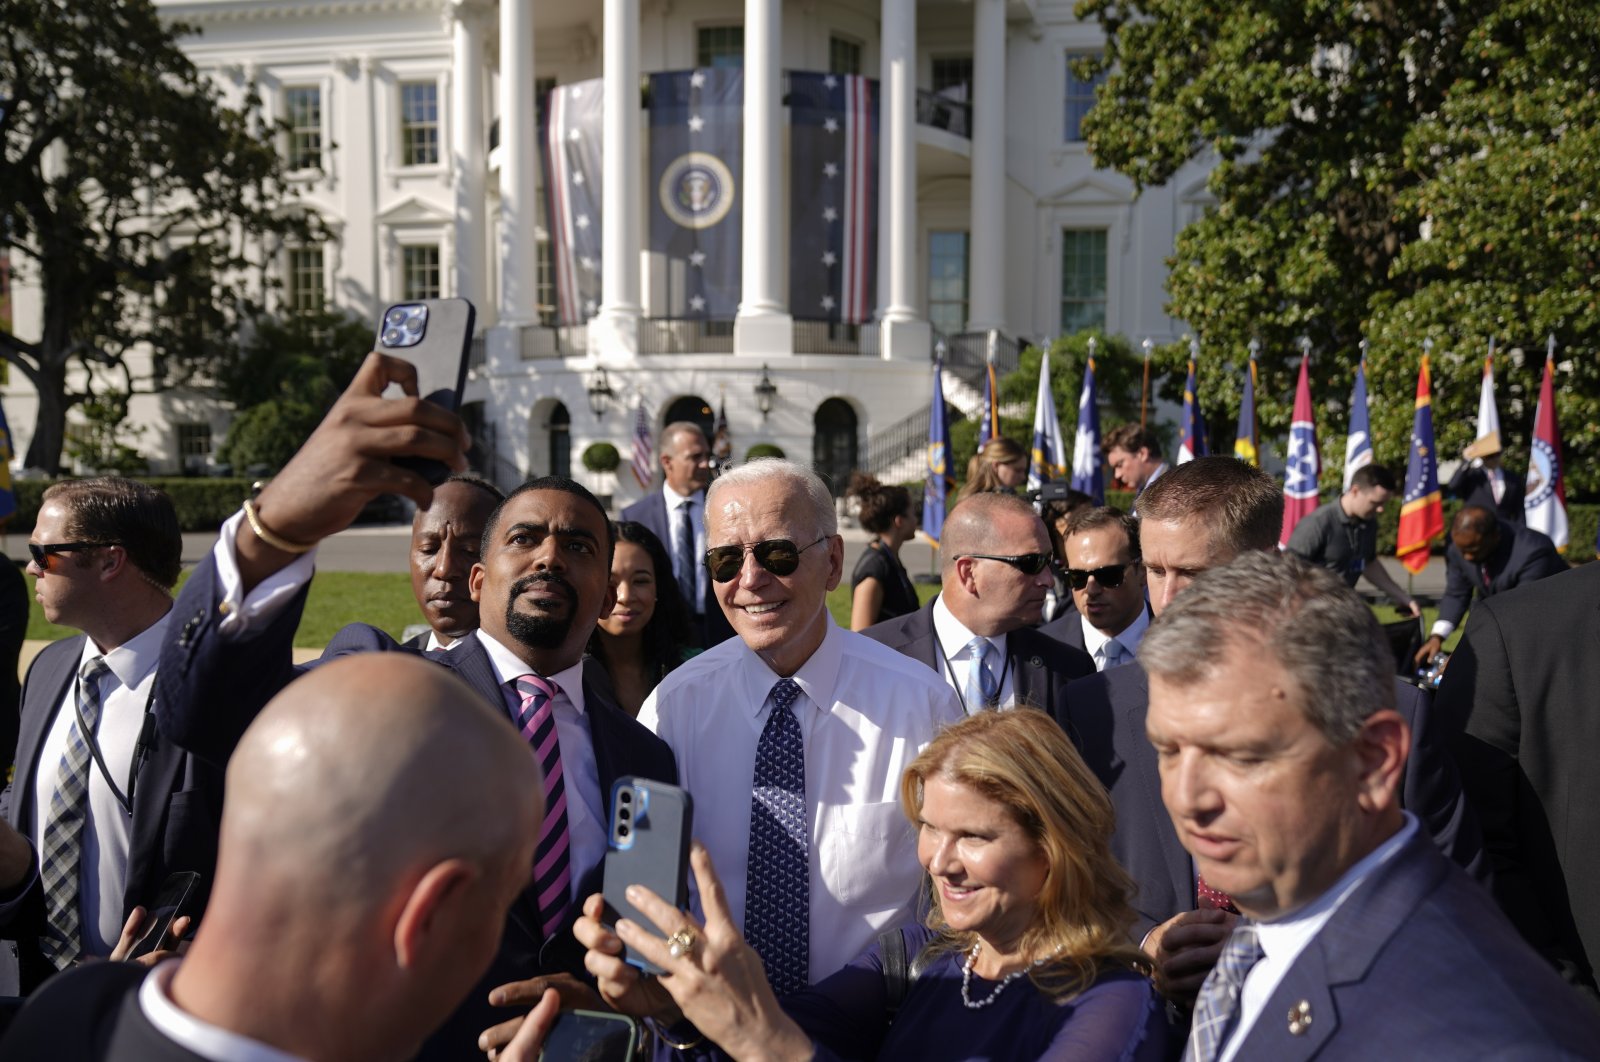 U.S. President Joe Biden poses for a photo after speaking on the South Lawn of the White House, in Washington, U.S., Sept. 13, 2022. (AP Photo)